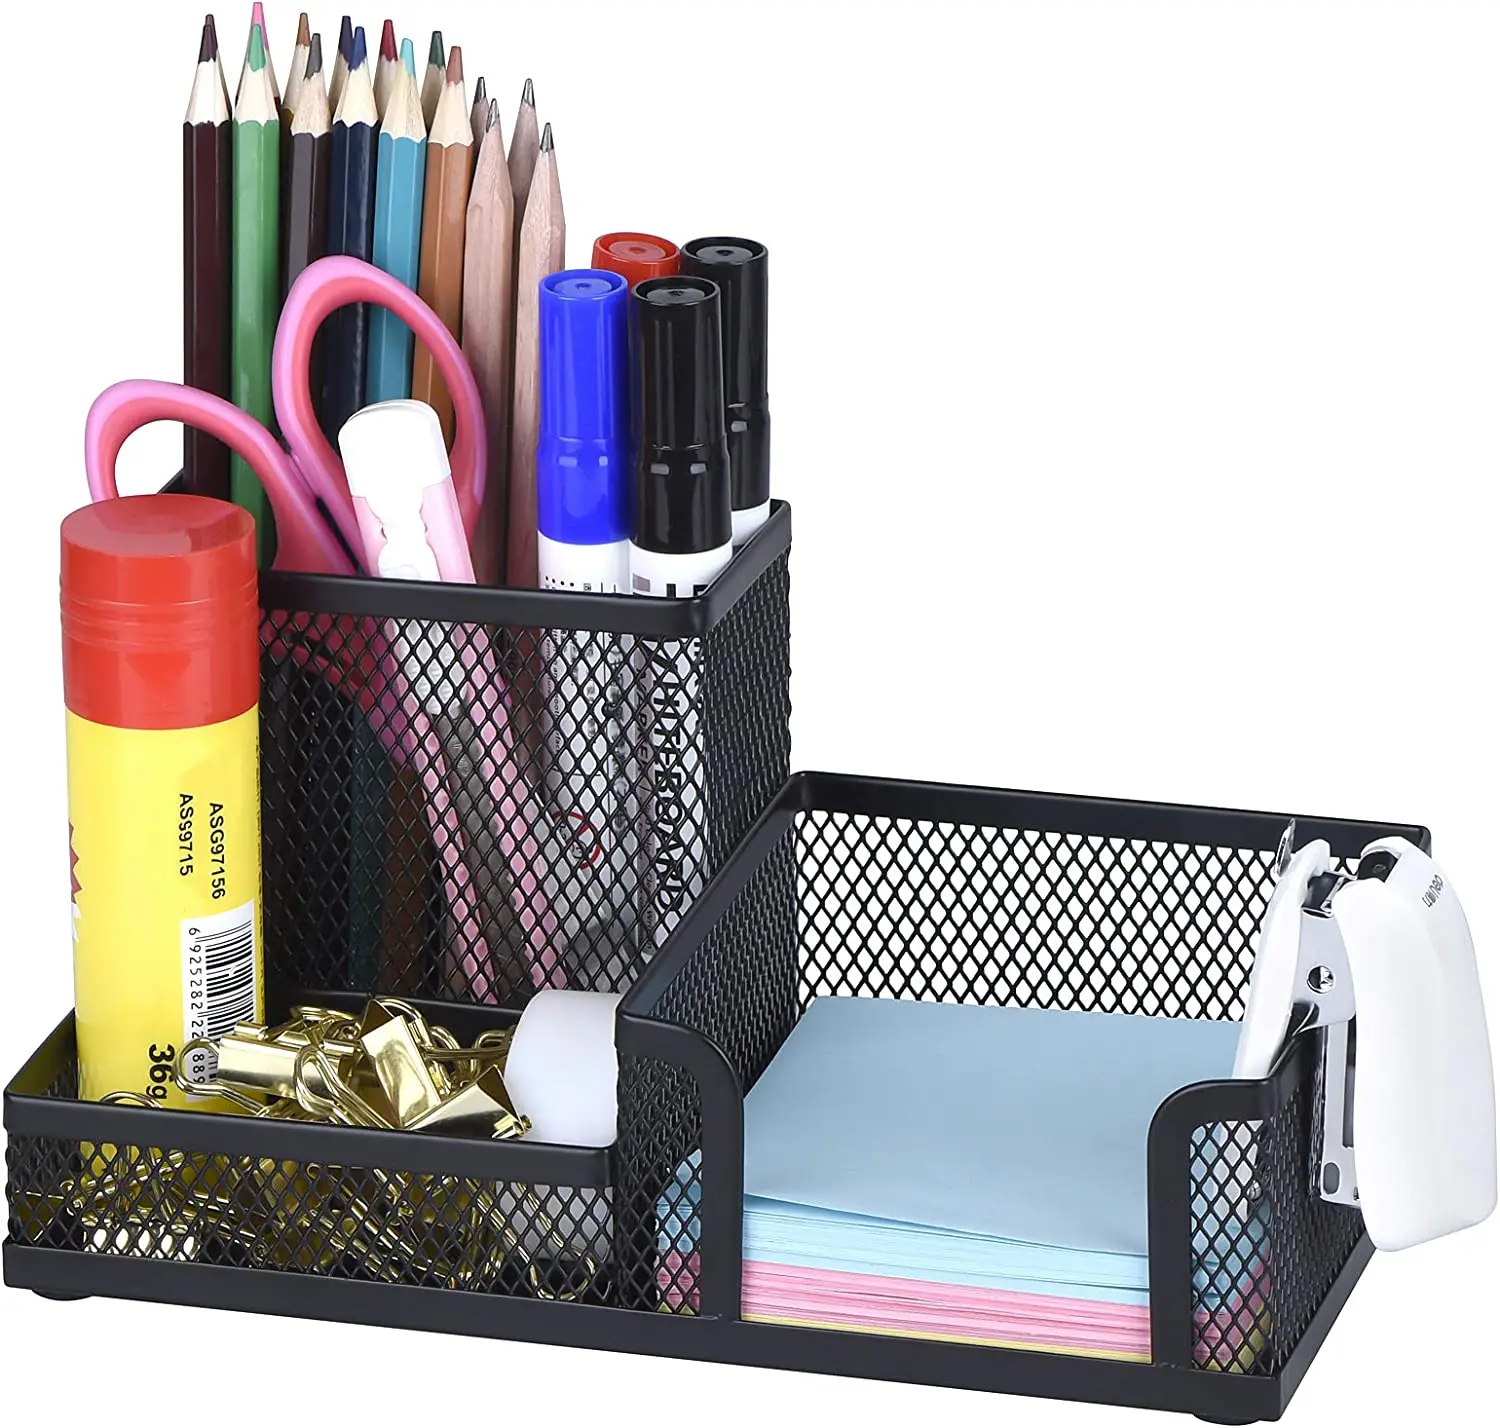 Black Pen Holder, Mesh Office Supplies Accessories Caddy with Sticky Notes Holder, Desk Organizer for Home, Office and School multifuncional desk metal mesh pen holder organizer office school stationery storage box pencil case stand desktop accessories